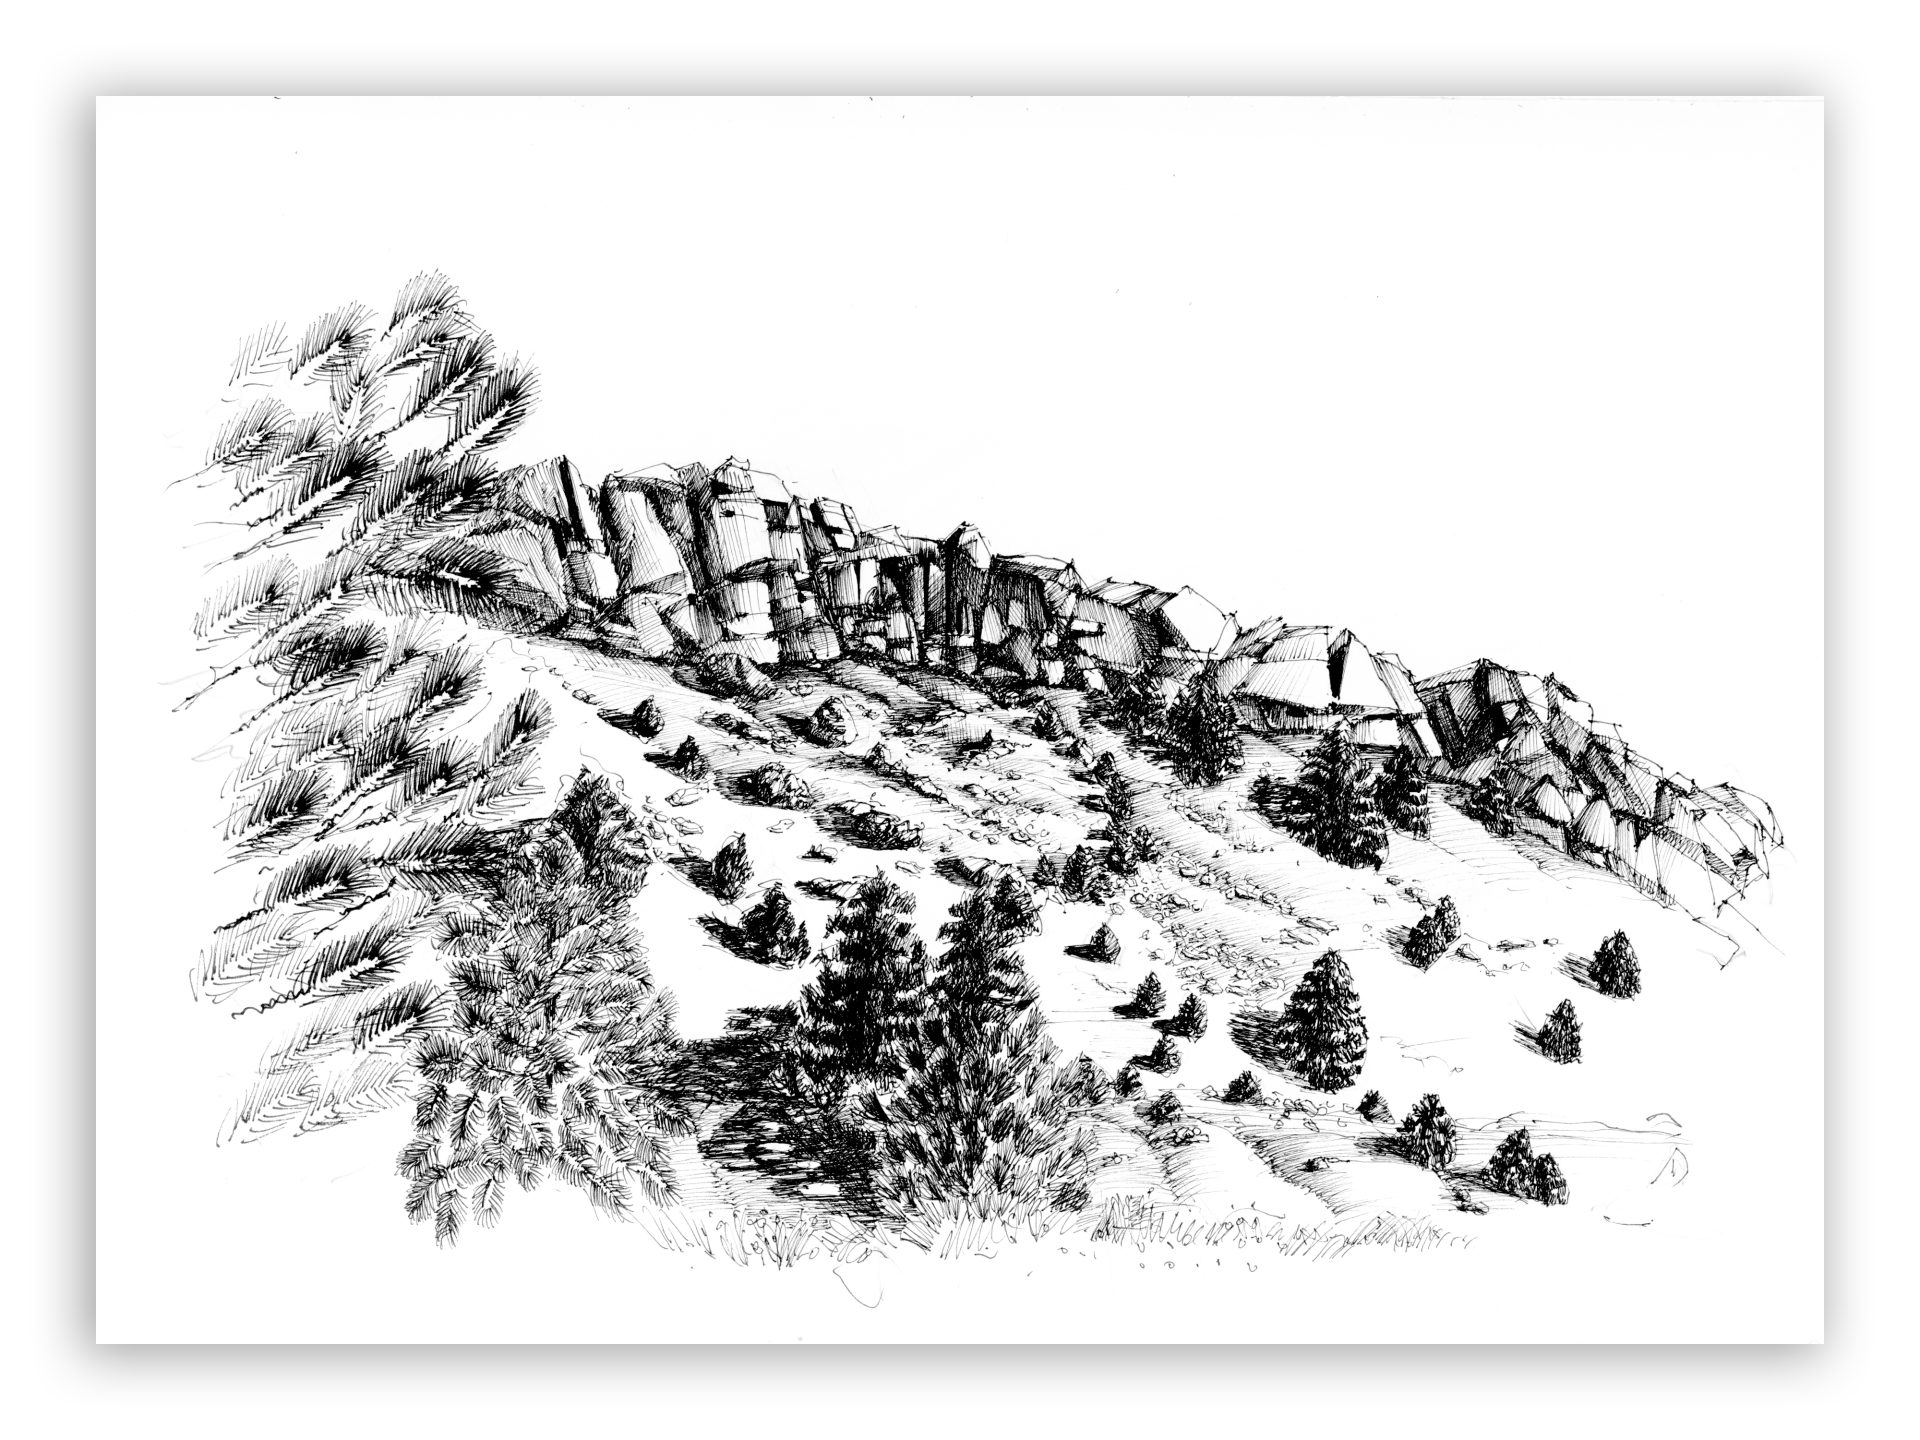 ink drawing of the goodhope mine site